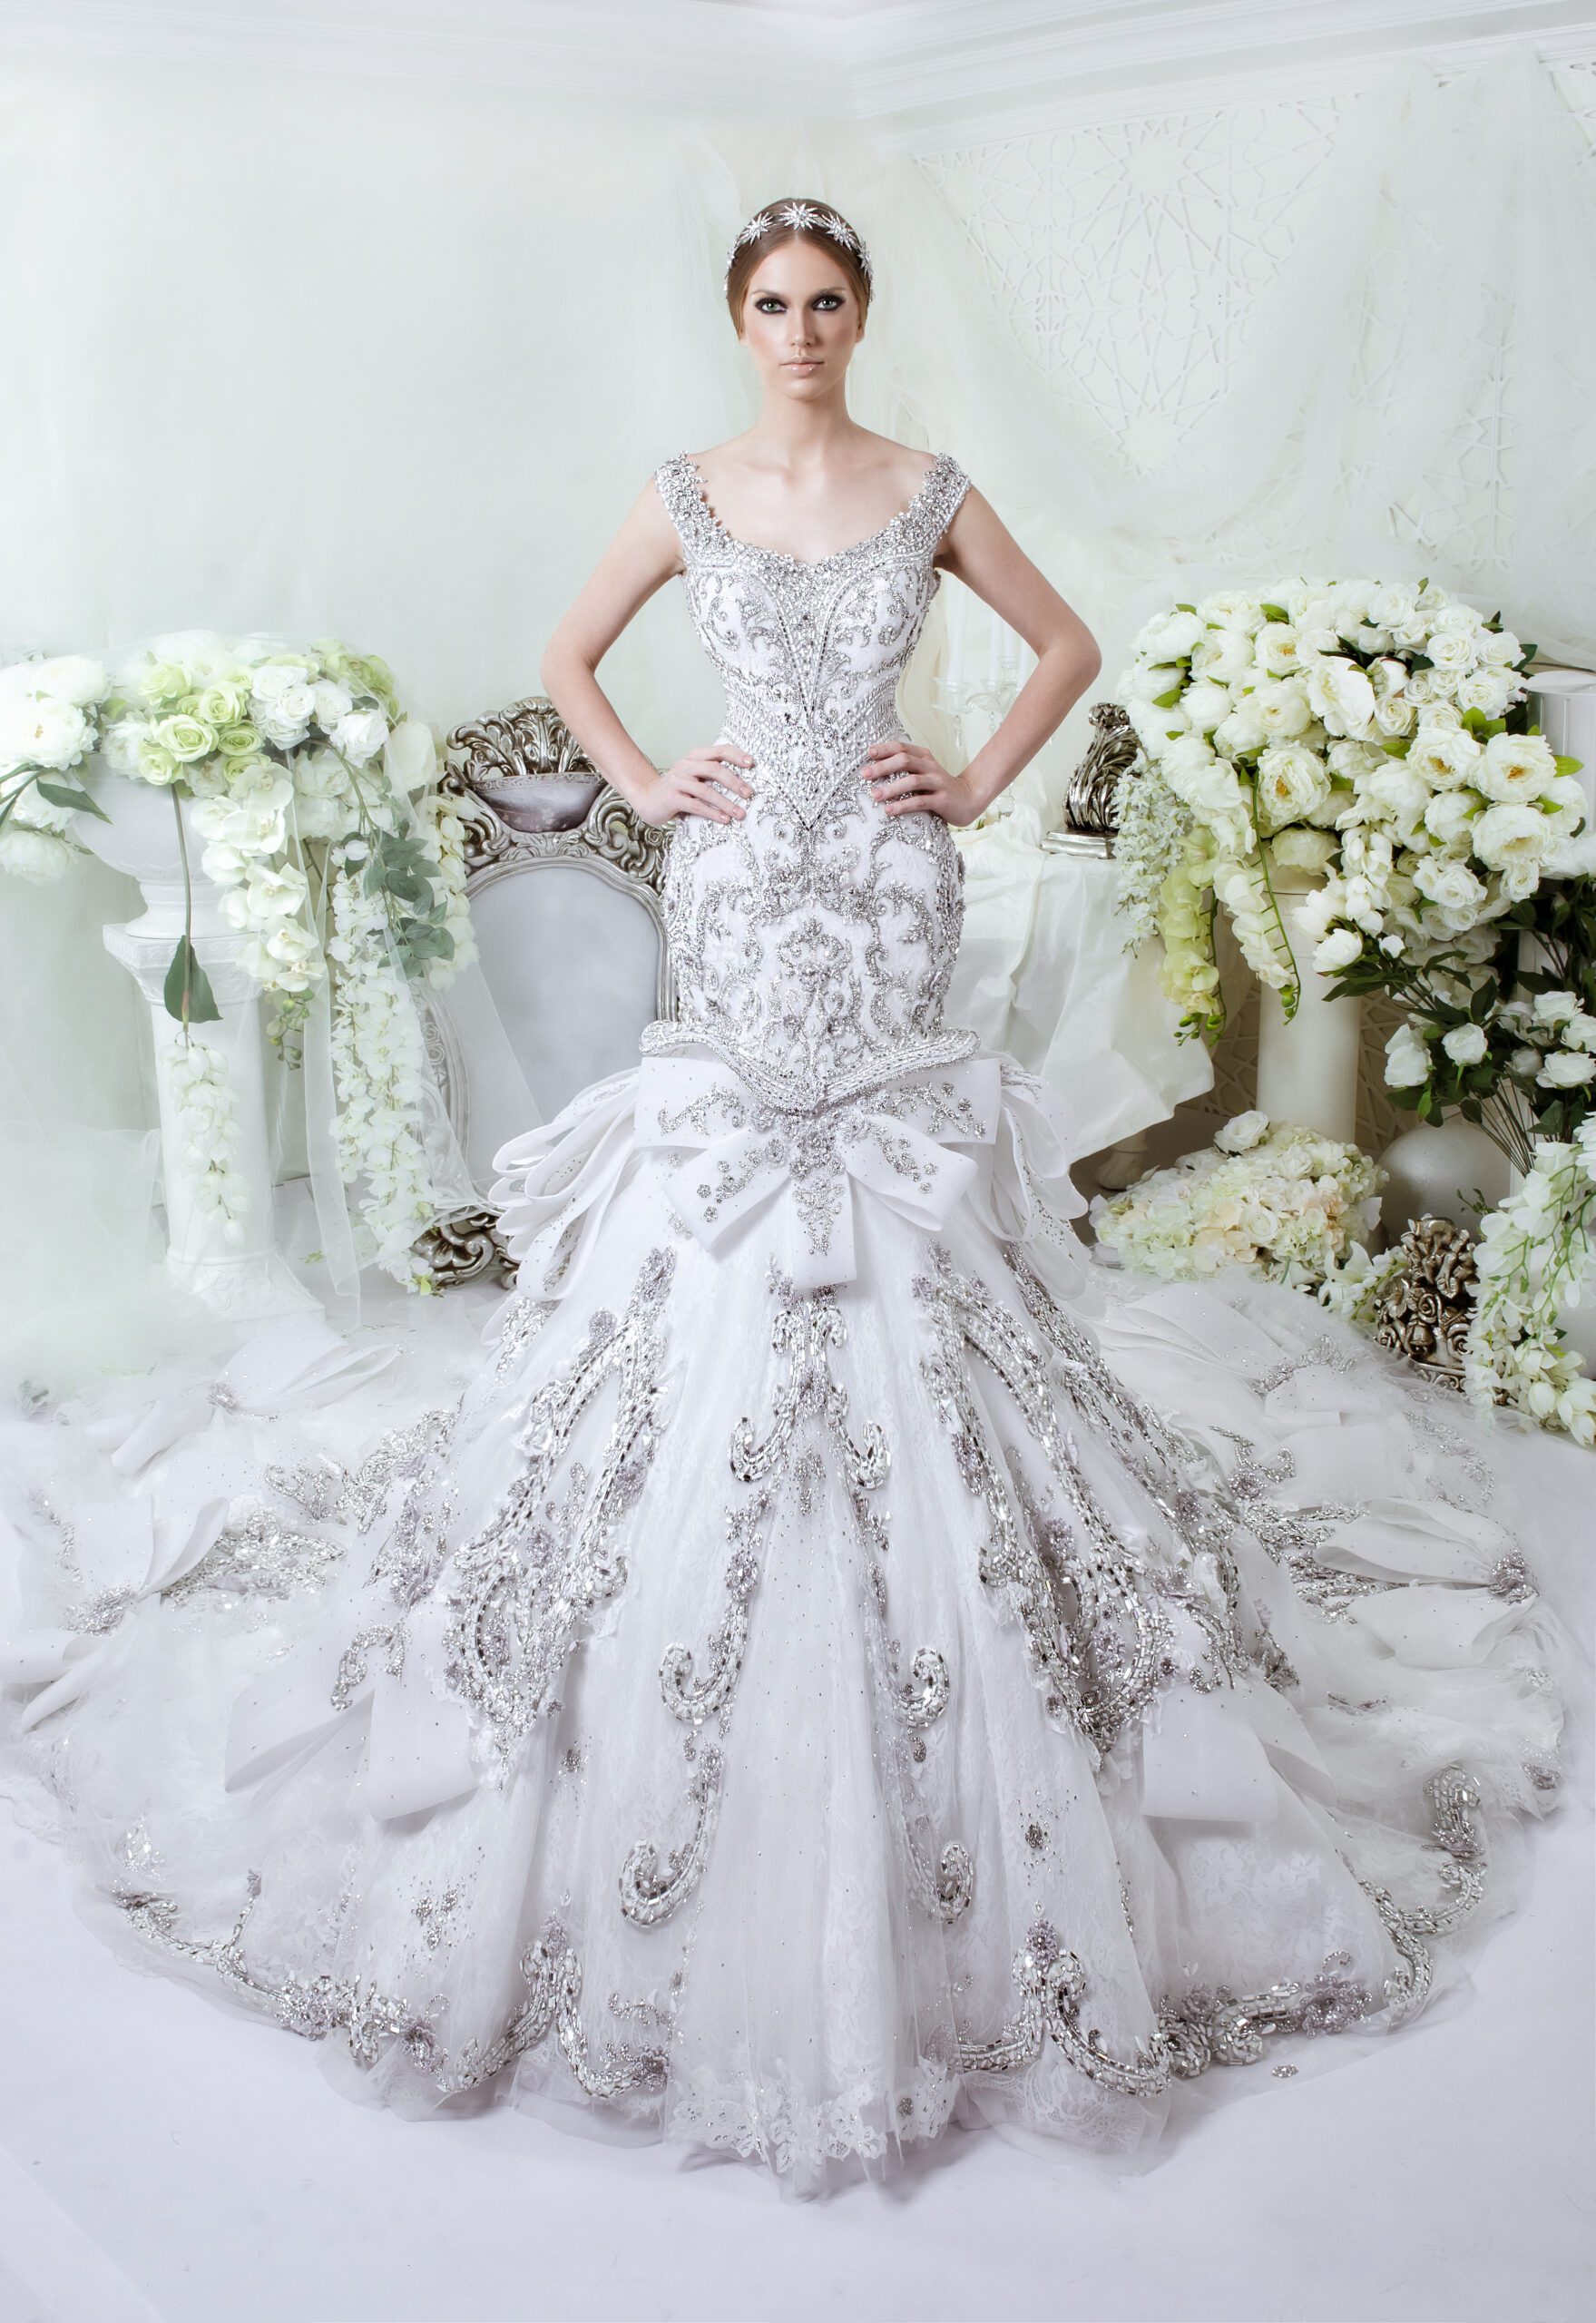 fashion atelier by darsara 19 2 scaled Stunning bridal and wedding dresses available for rental in Dubai, UAE